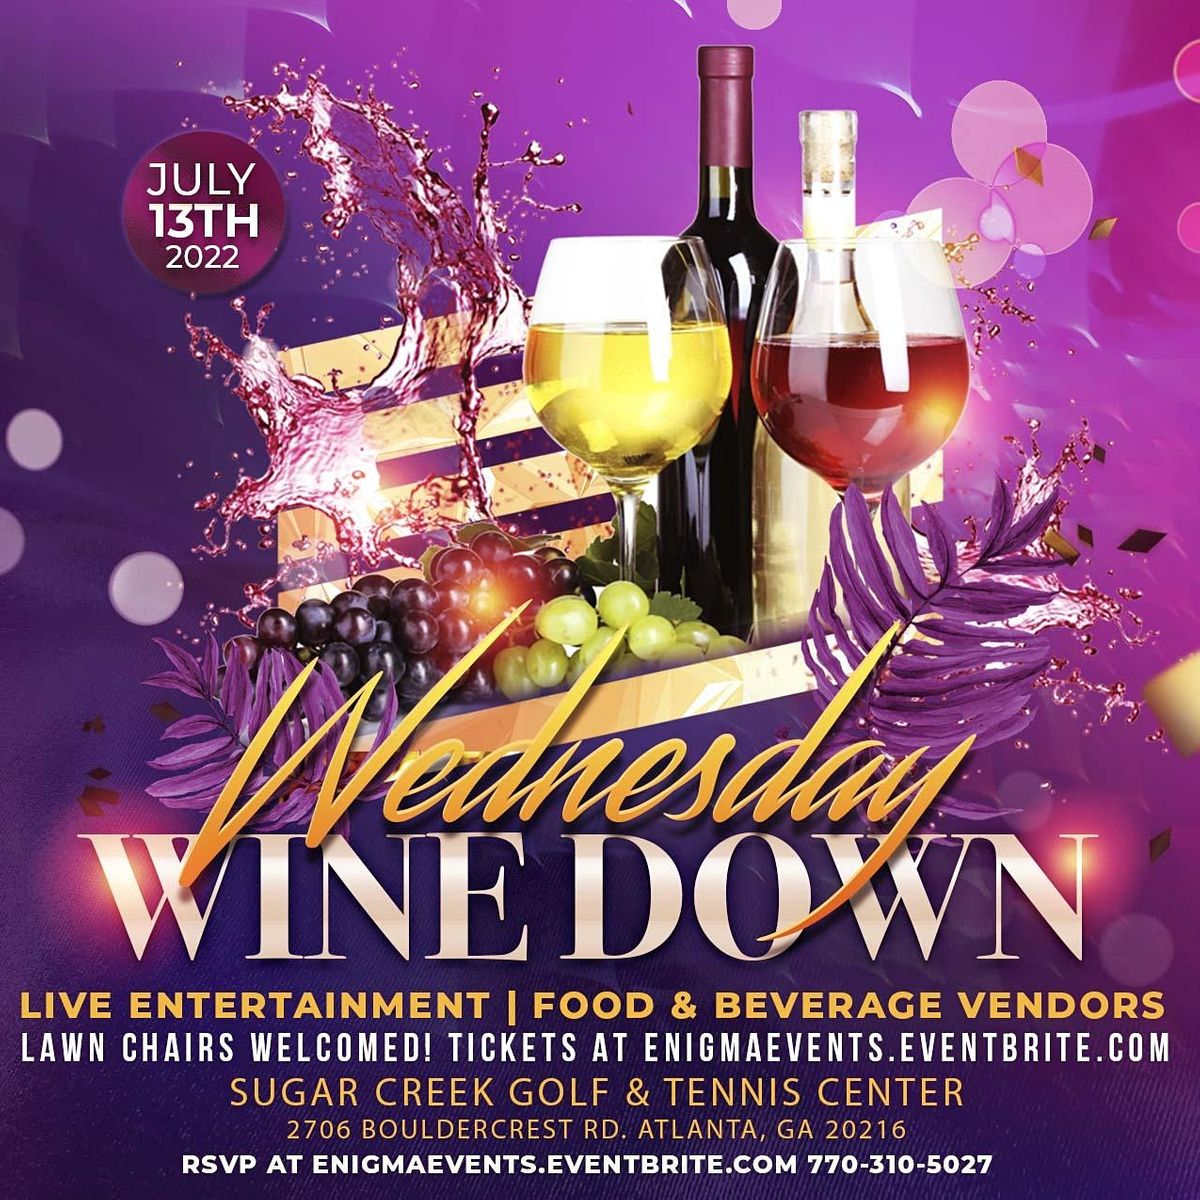 Wednesday Wine Down at Sugar Creek Tennis and Golf Center